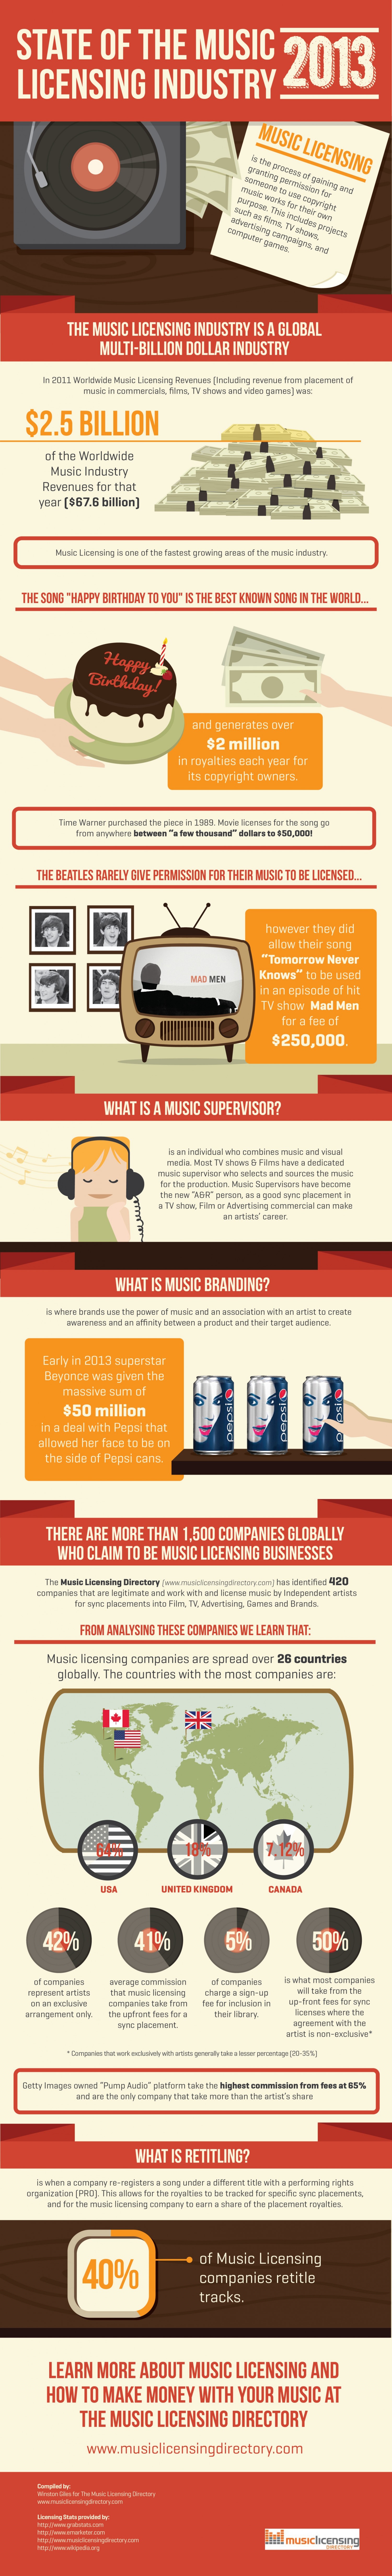 State of the Music Licensing Industry - 2013